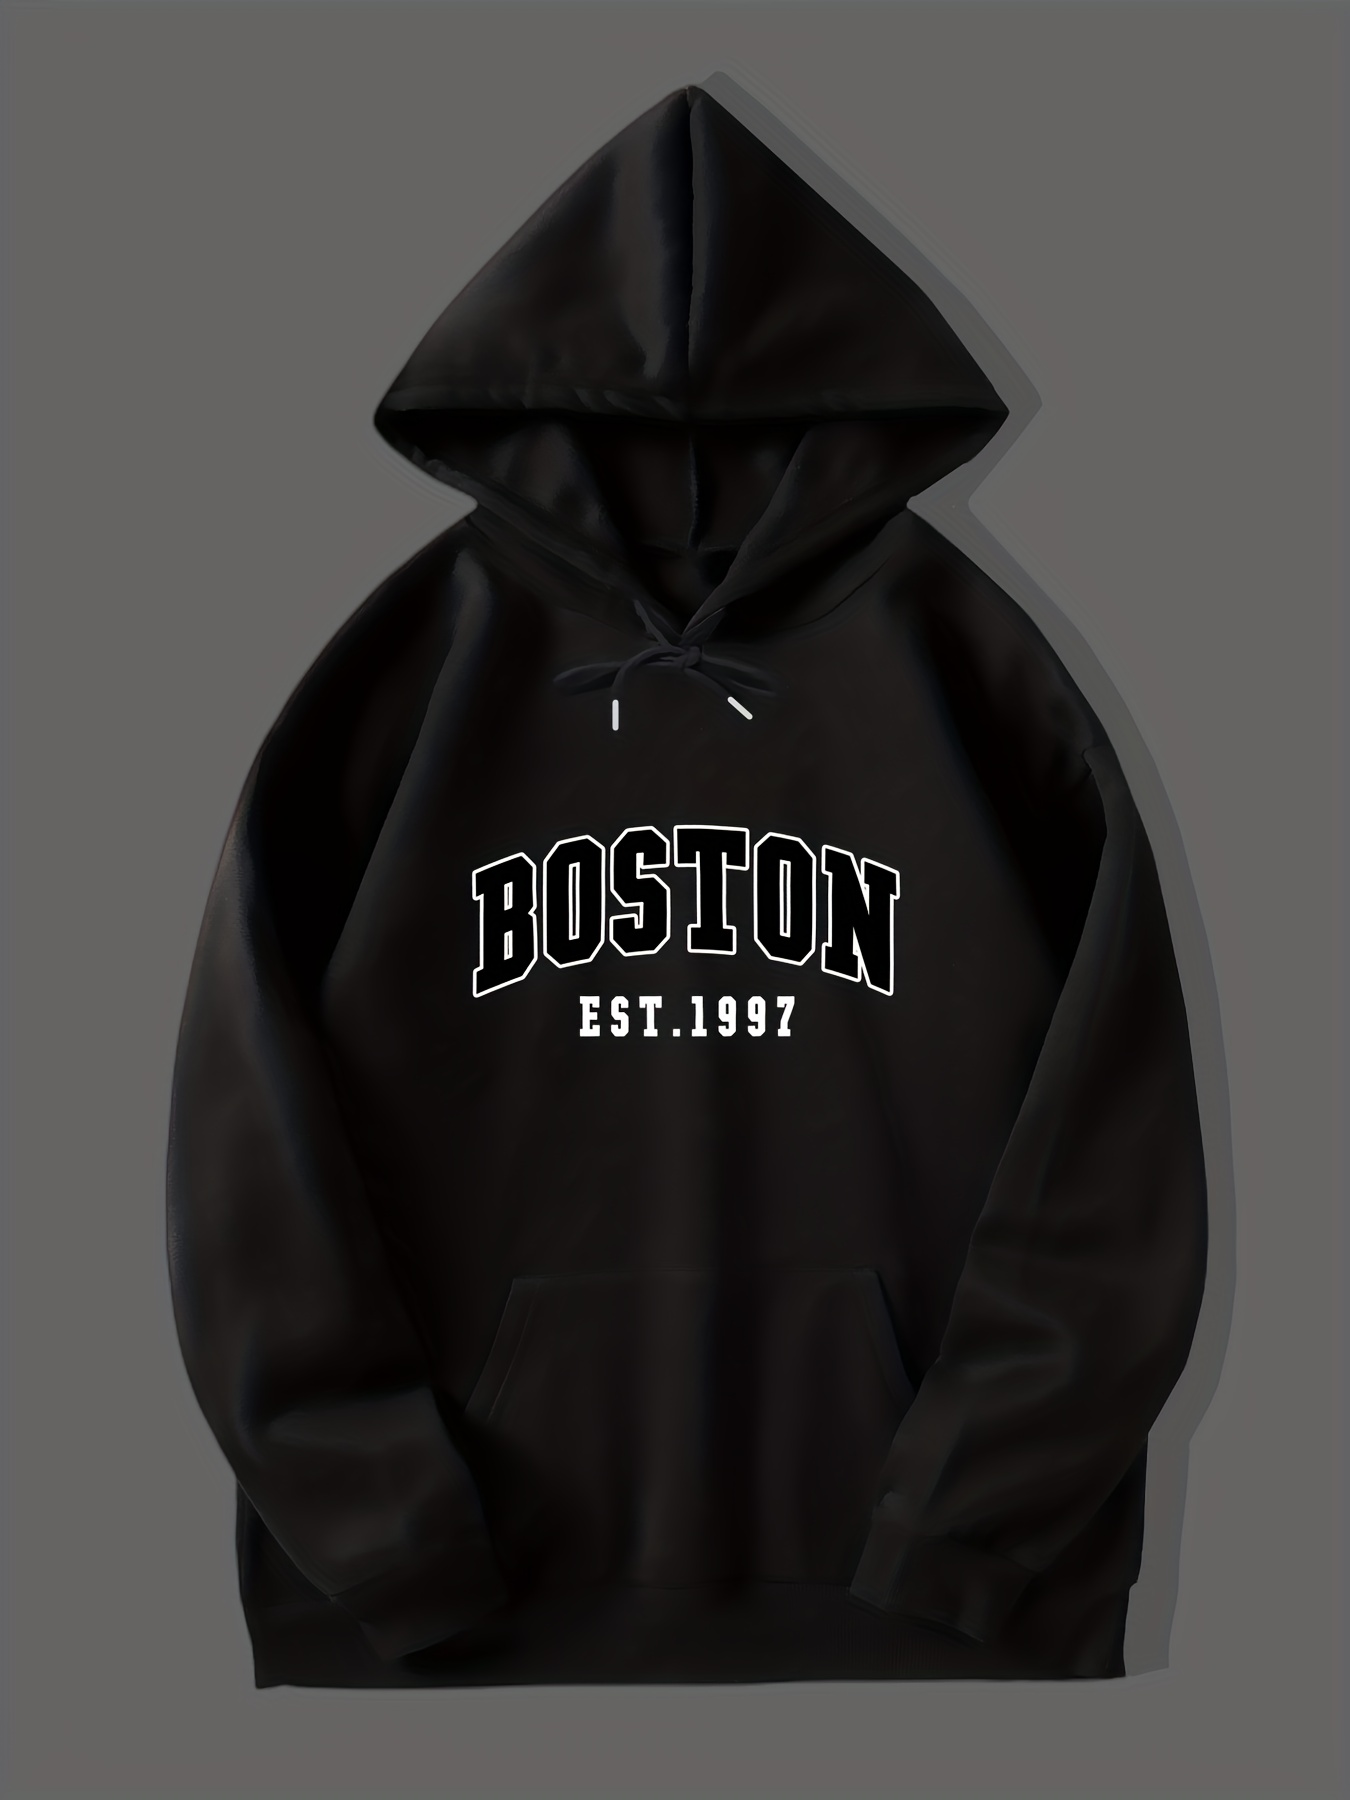 boston print mens hooded sweatshirt with kangaroo pocket mens chic pullover tops for fall winter details 16